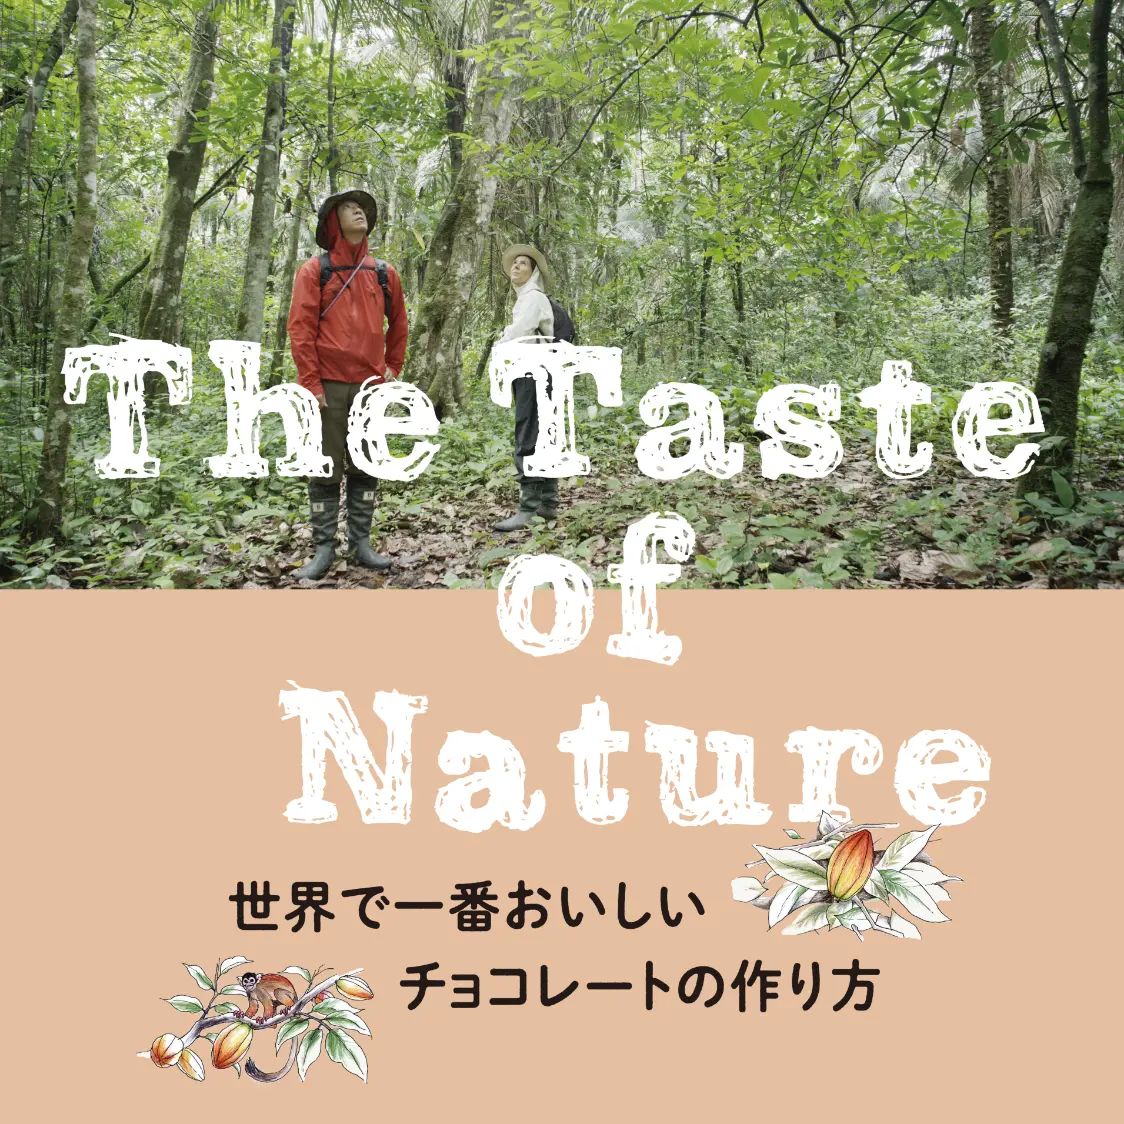 “THE TASTE OF NATURE”